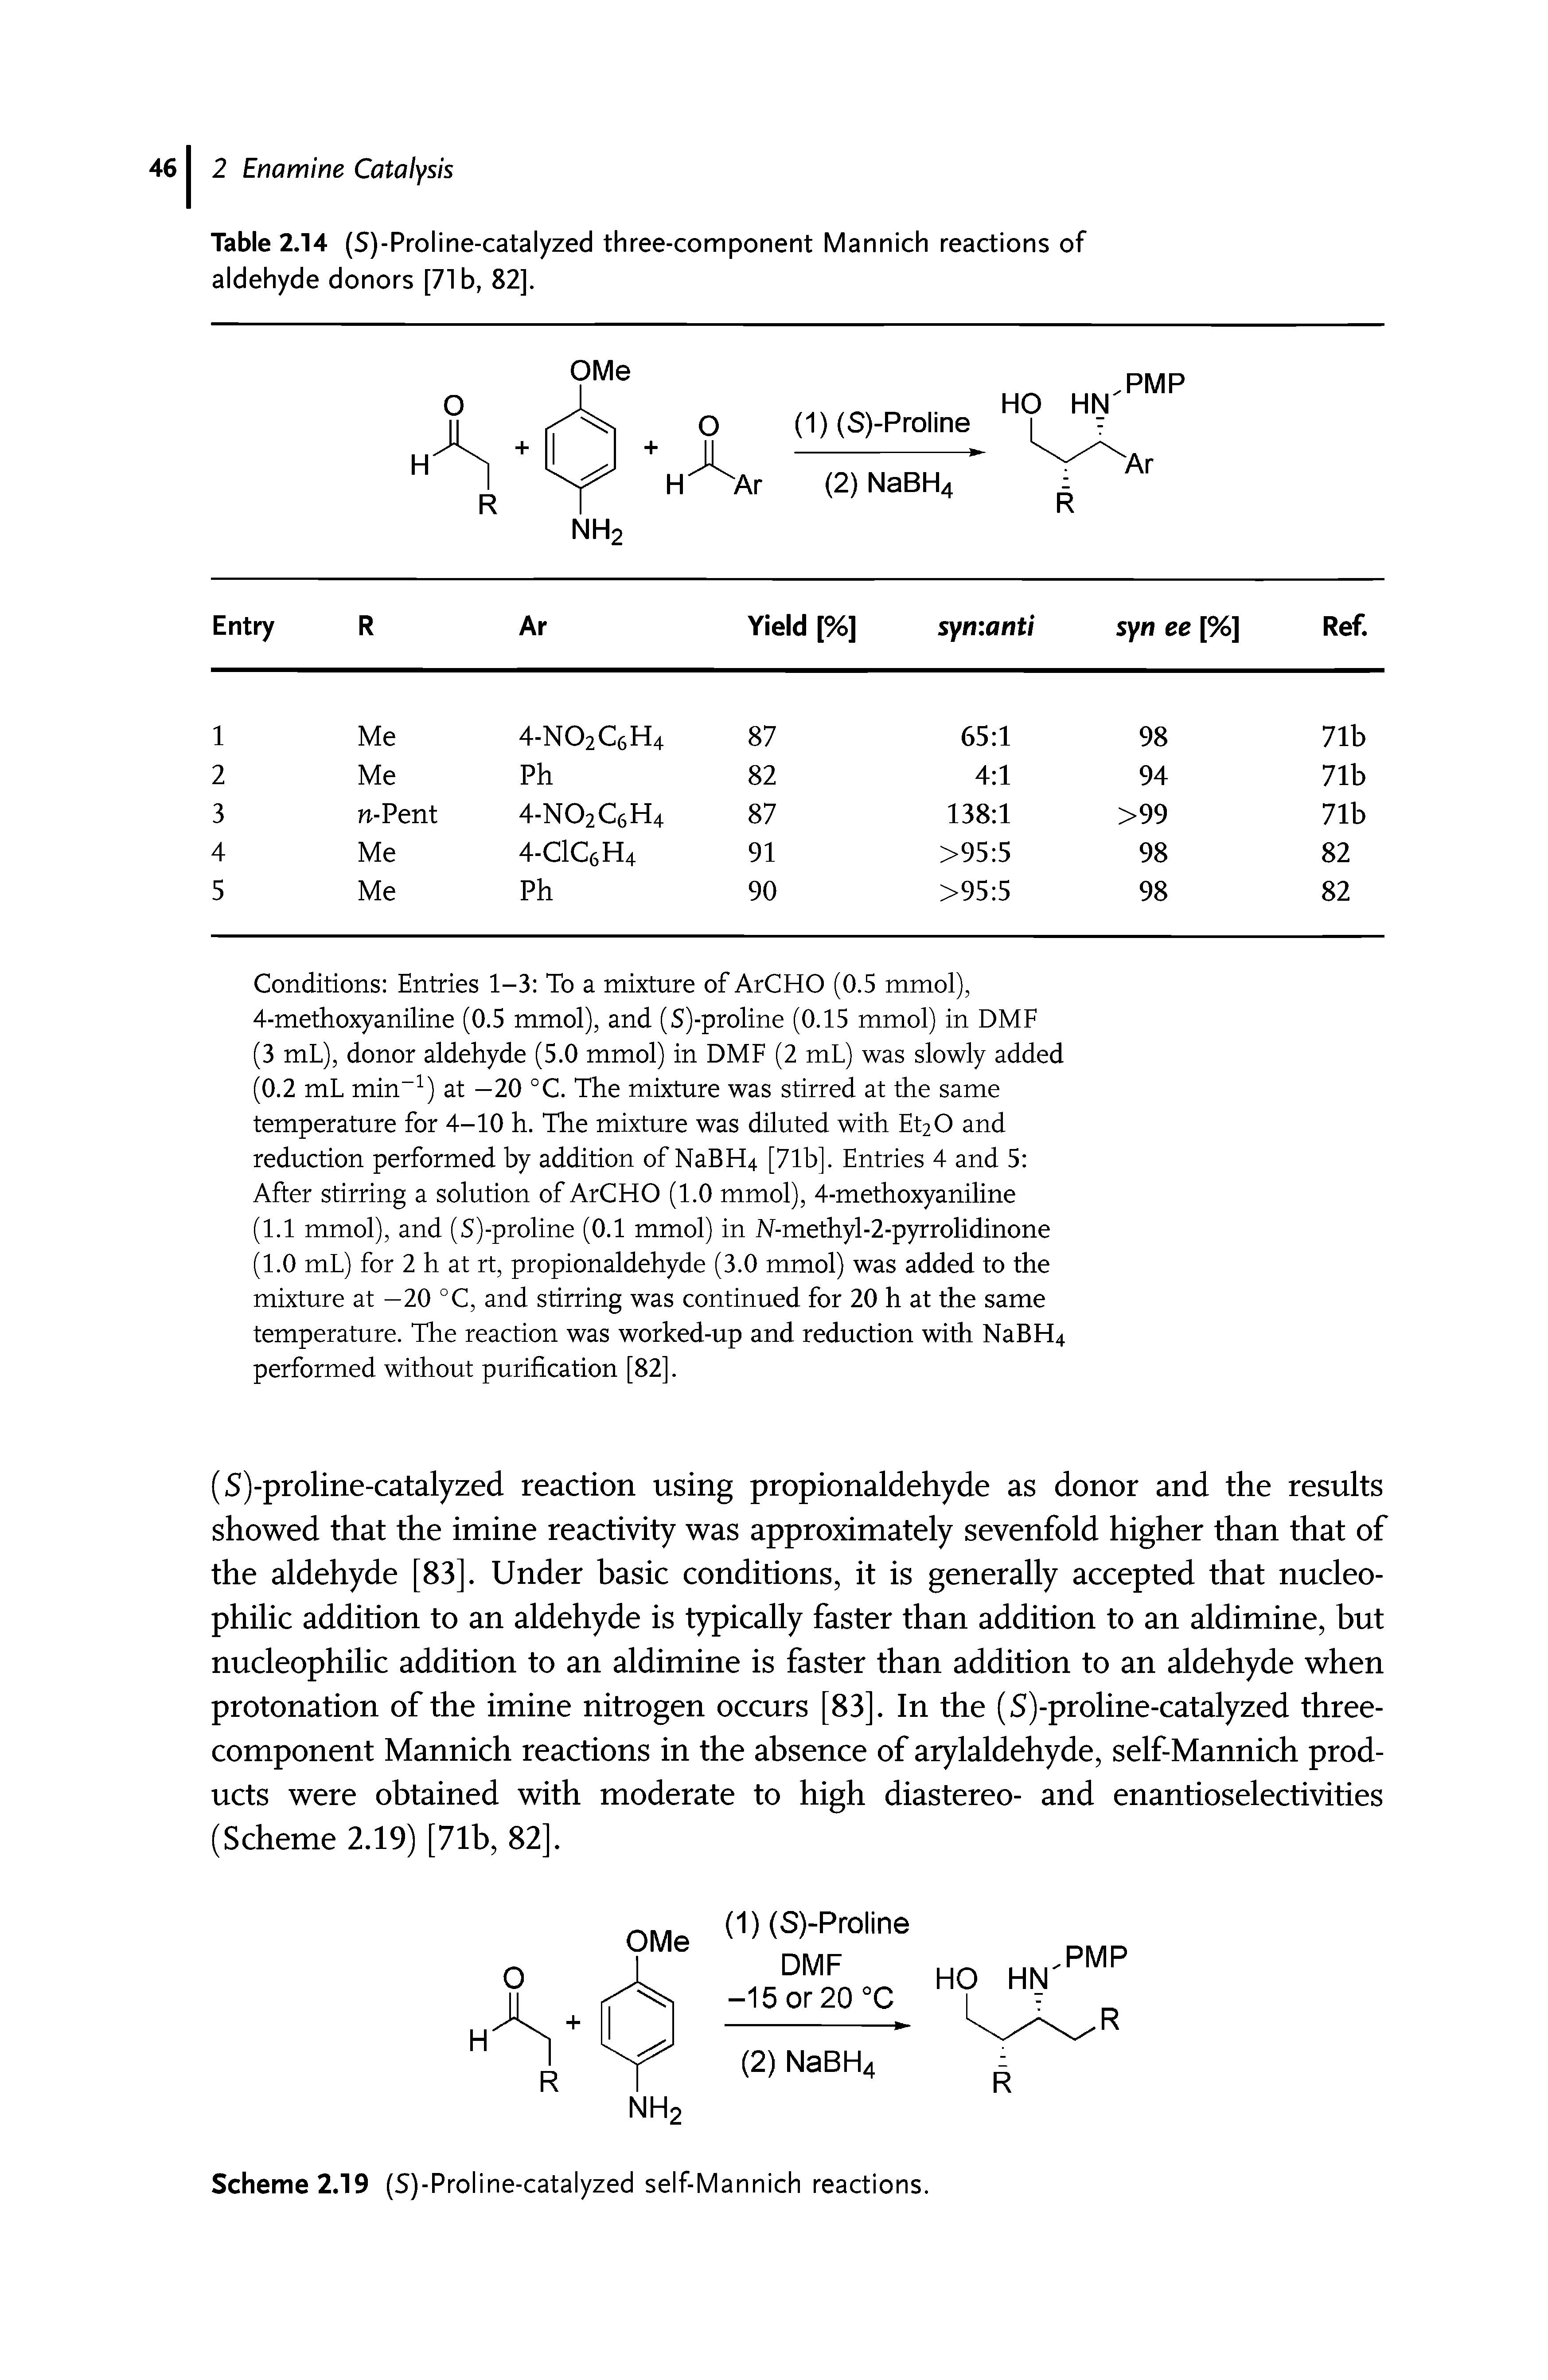 Table 2.14 (S)-Proline-catalyzed three-component Mannich reactions of aldehyde donors [71b, 82].